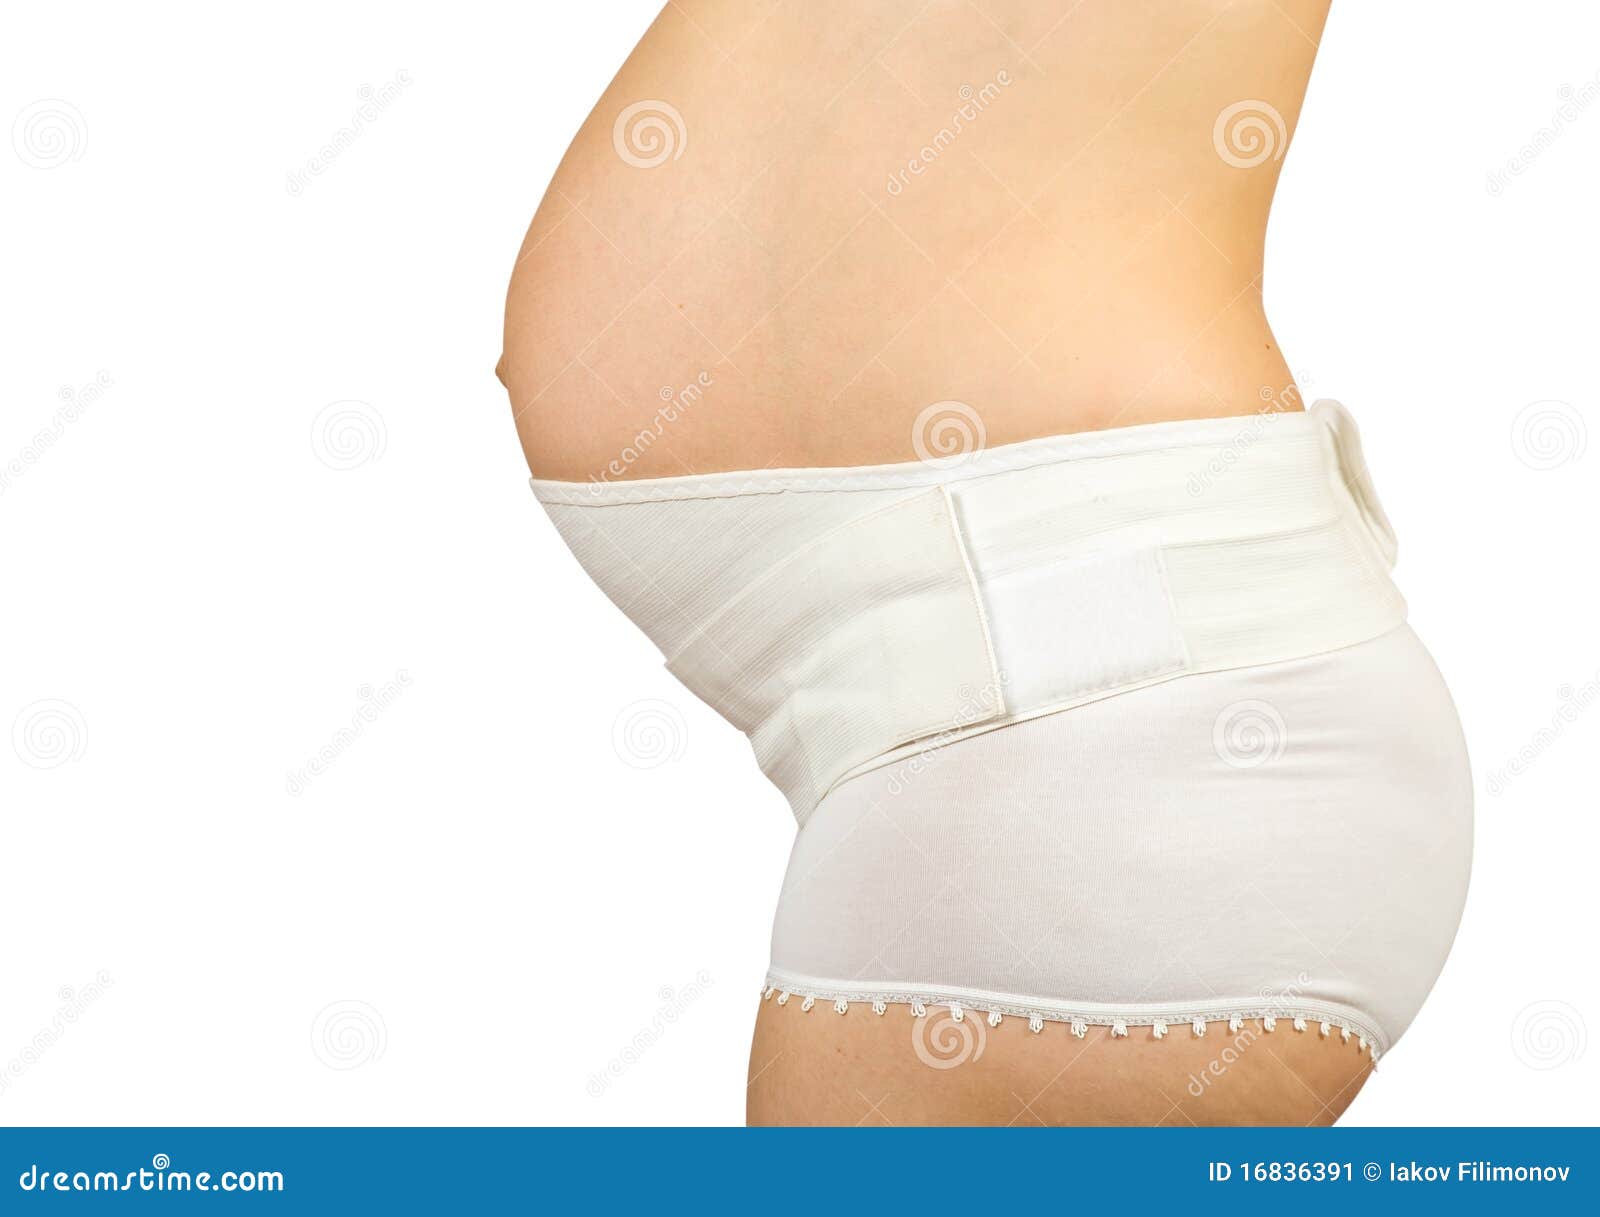 Pregnant Woman Dressed Maternity Girdle Stock Image - Image of belly,  abdomen: 16836391